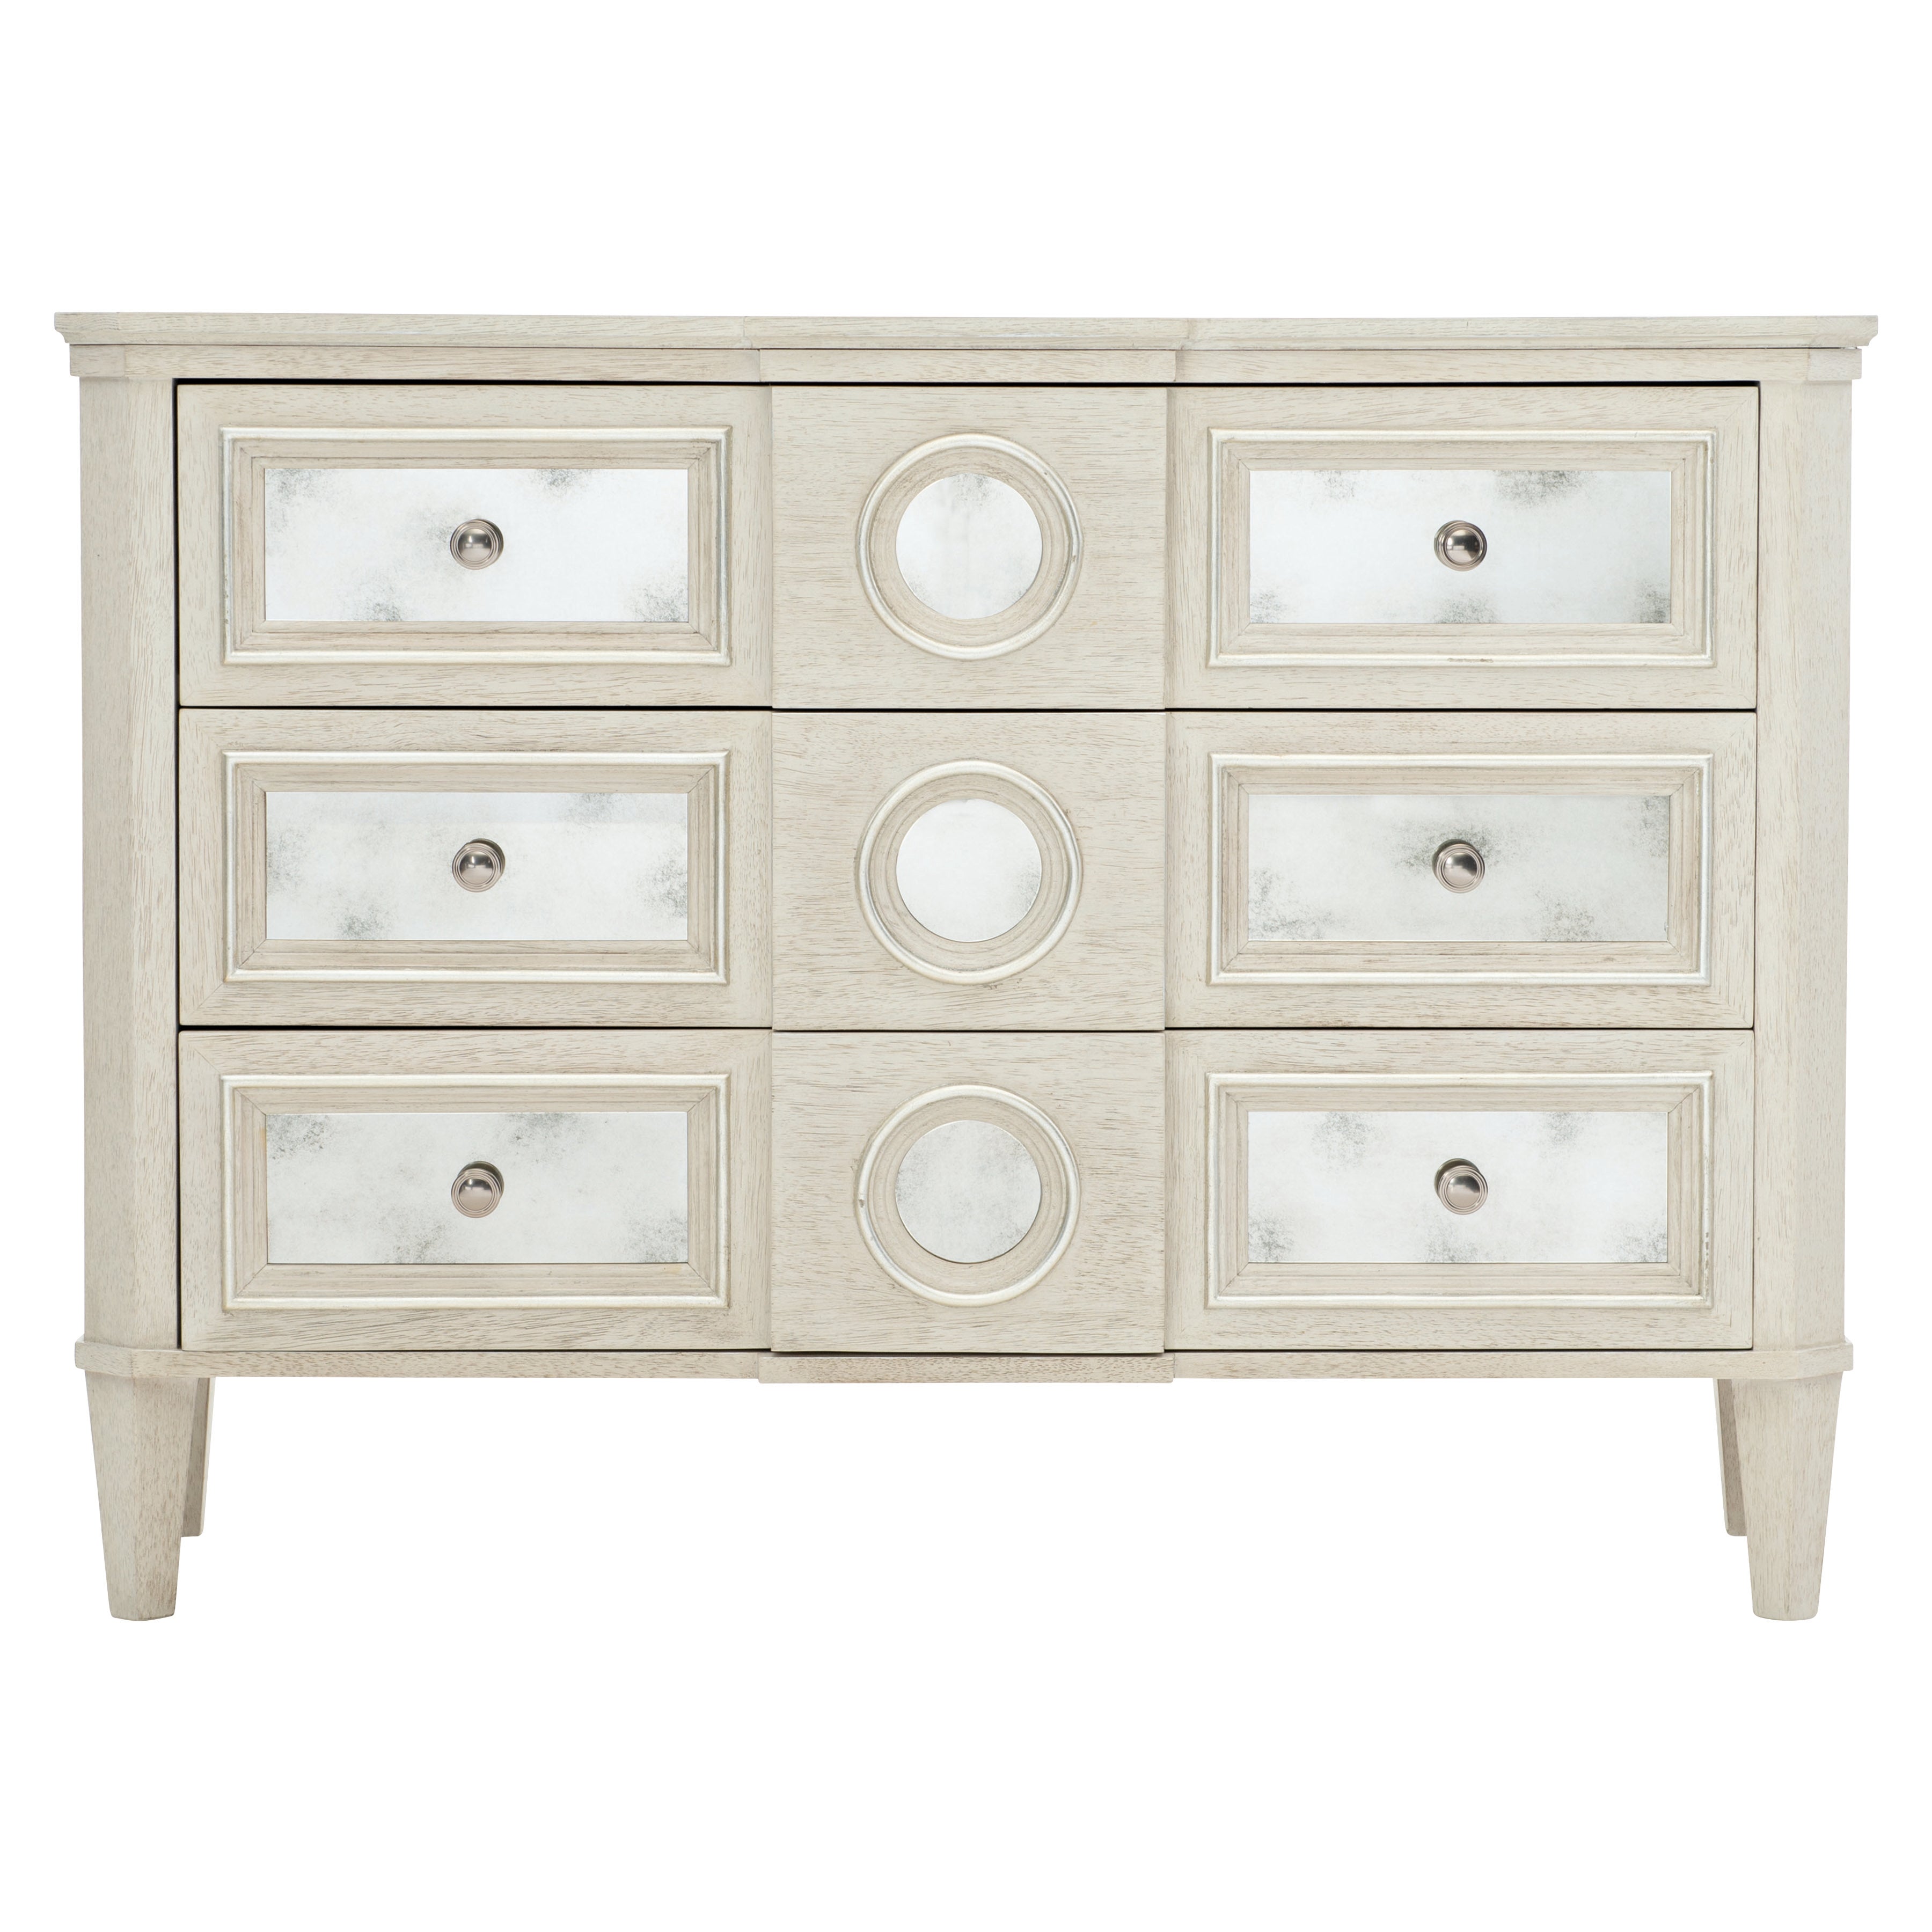 Allure Hall Chest